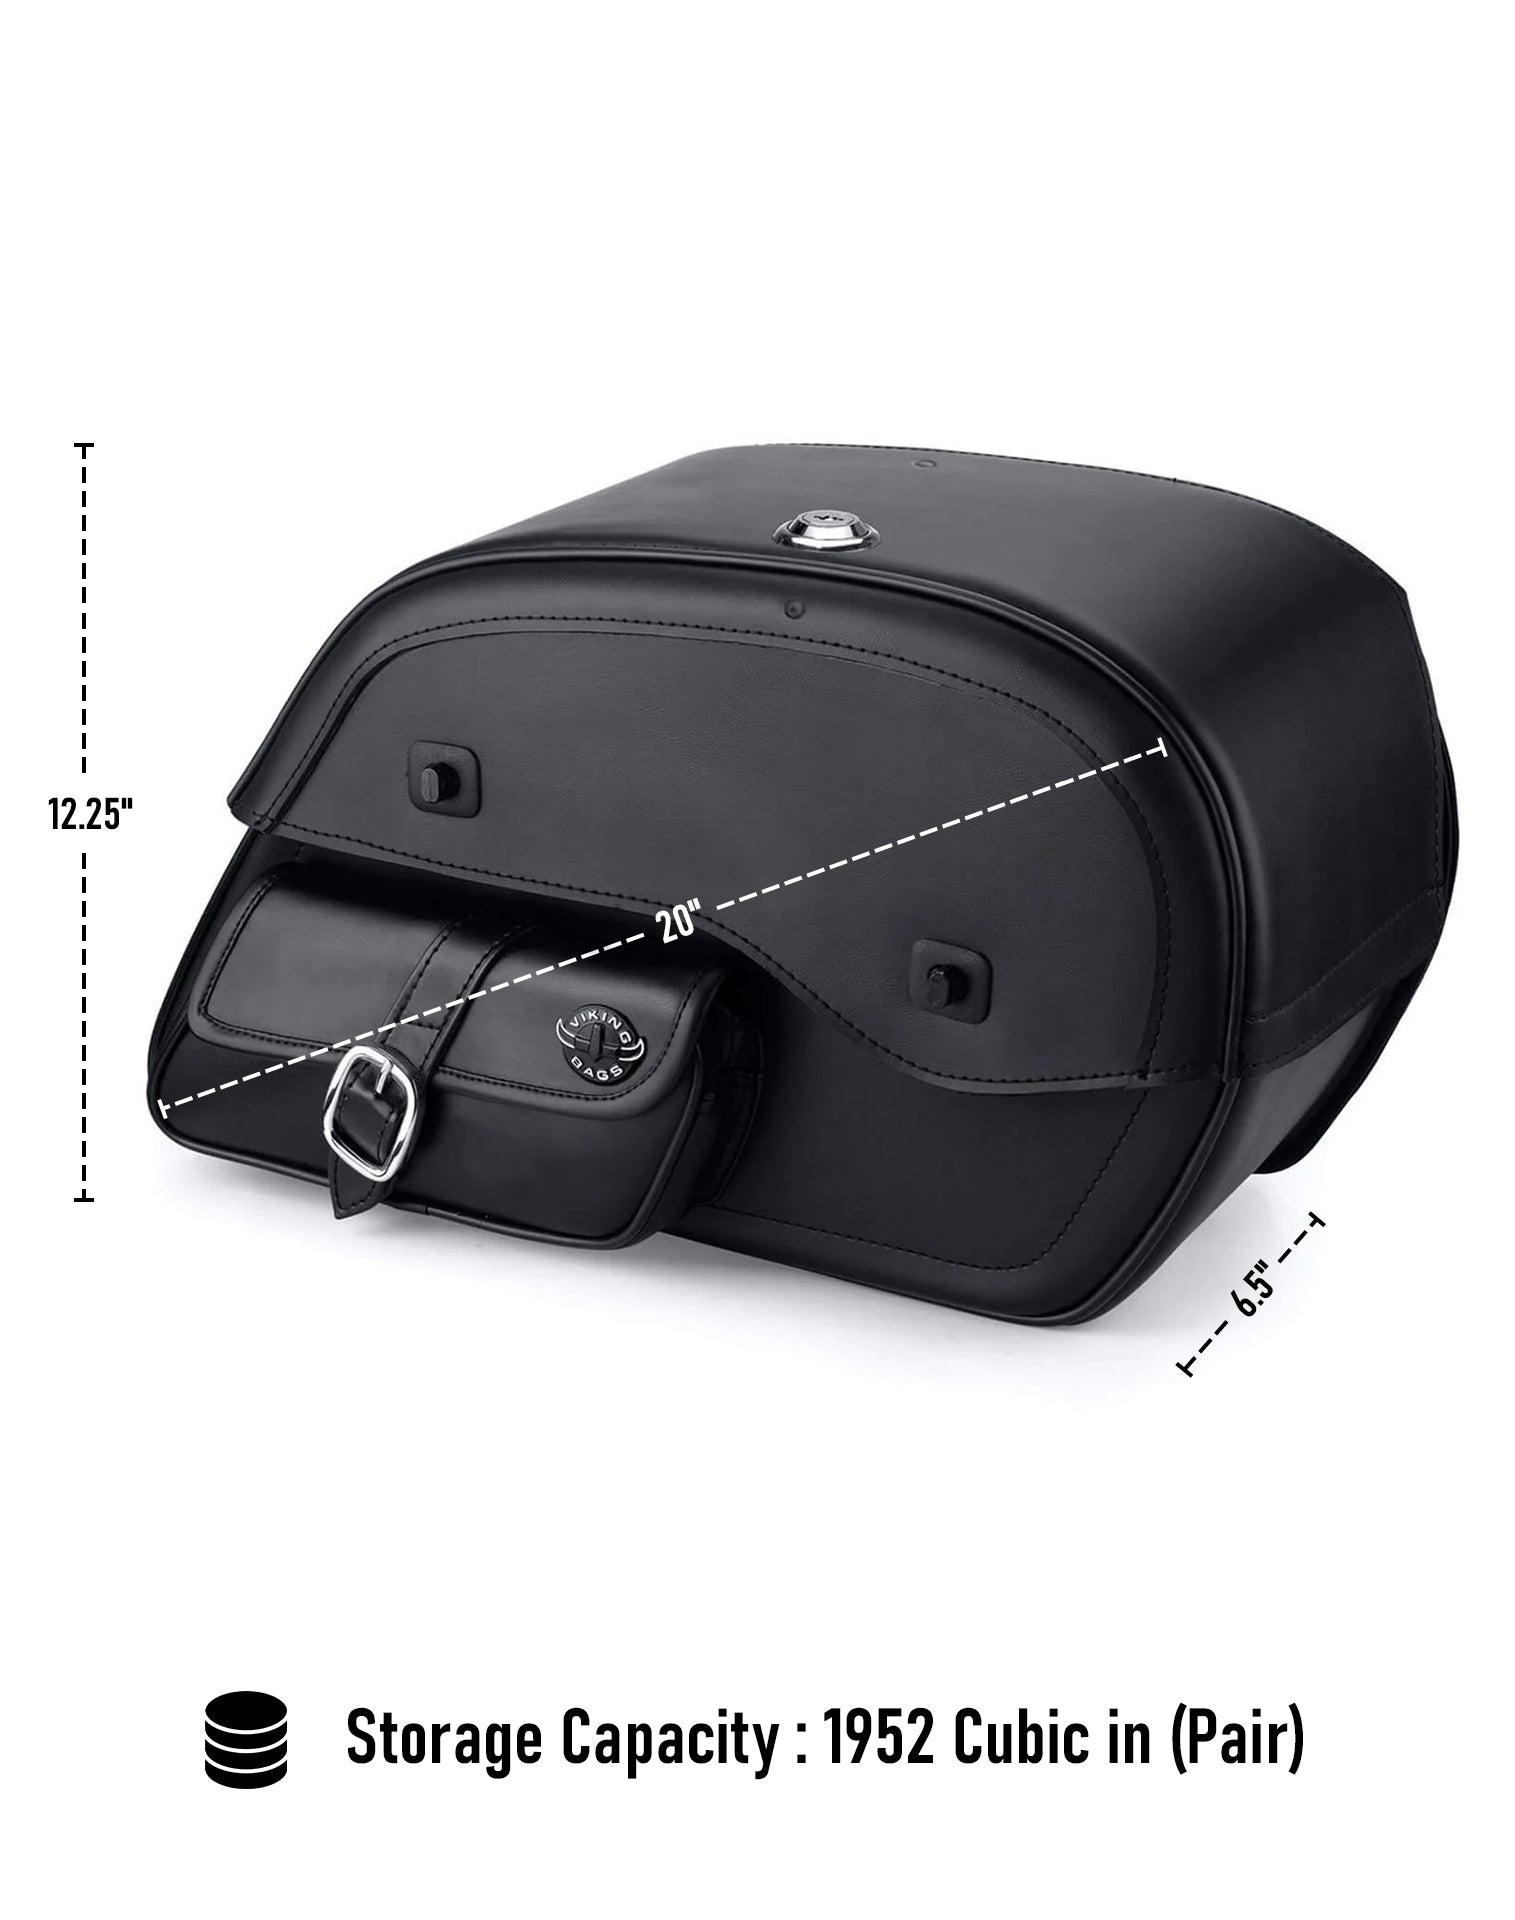 Viking Essential Side Pocket Large Leather Motorcycle Saddlebags For Harley Softail Breakout 114 Fxbr S Can Store Your Ridings Gears